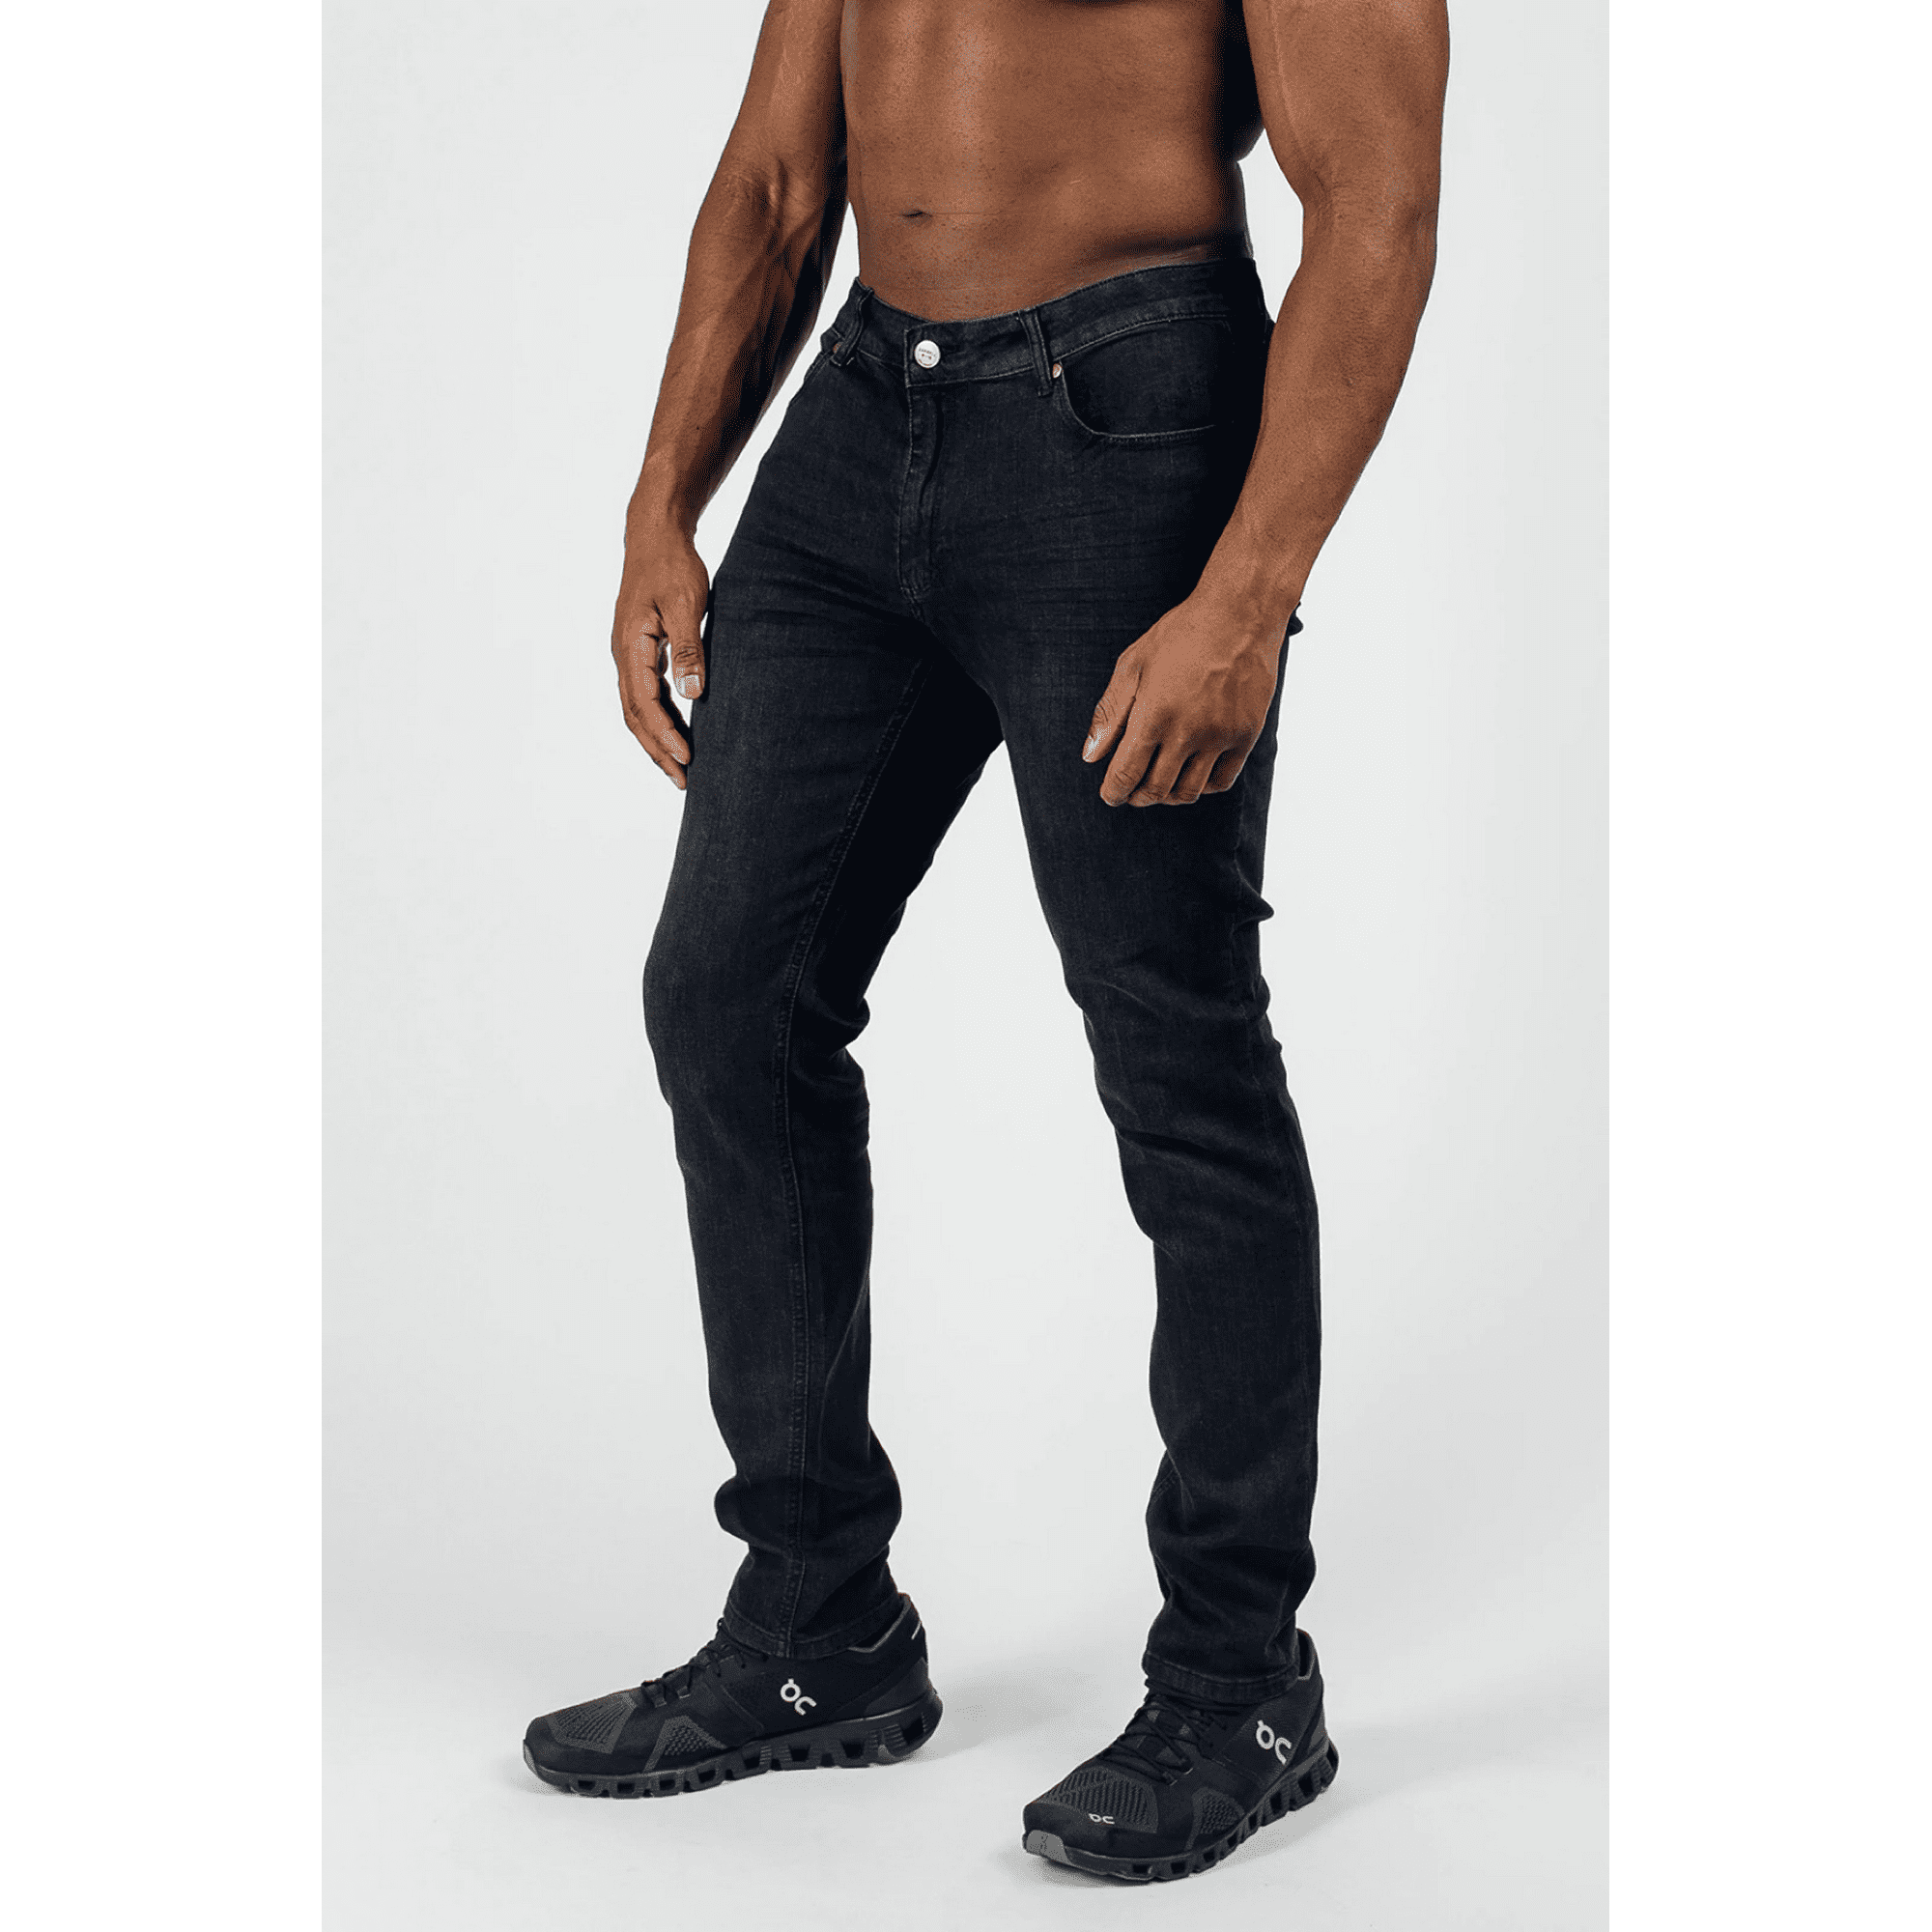 Barbell Apparel Men's Athletic Fit Jeans -